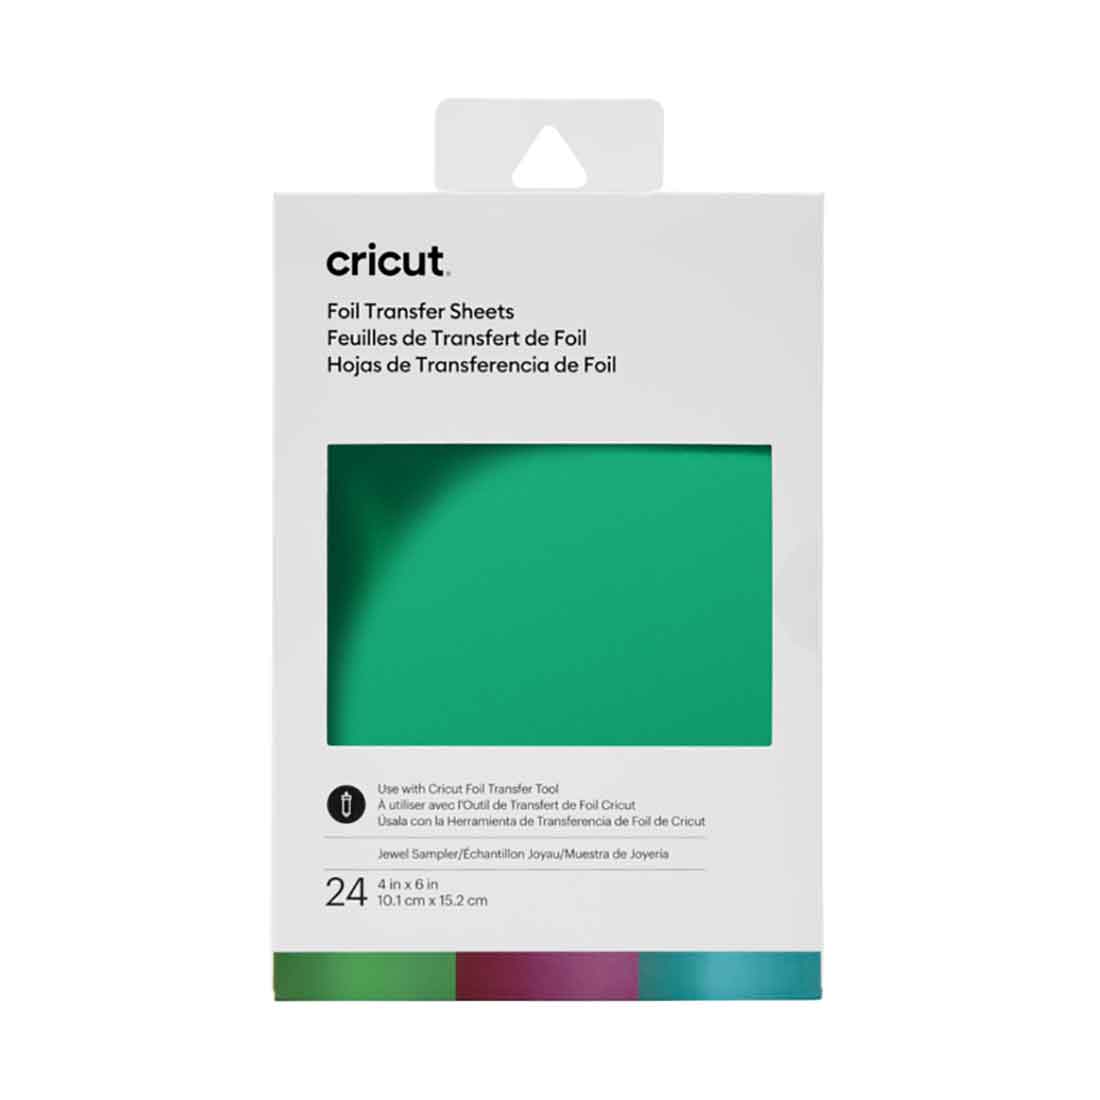 Cricut Machine 3-in-1 Foil Transfer Kit, Gold and Silver Transfer Sheets,  12x12 